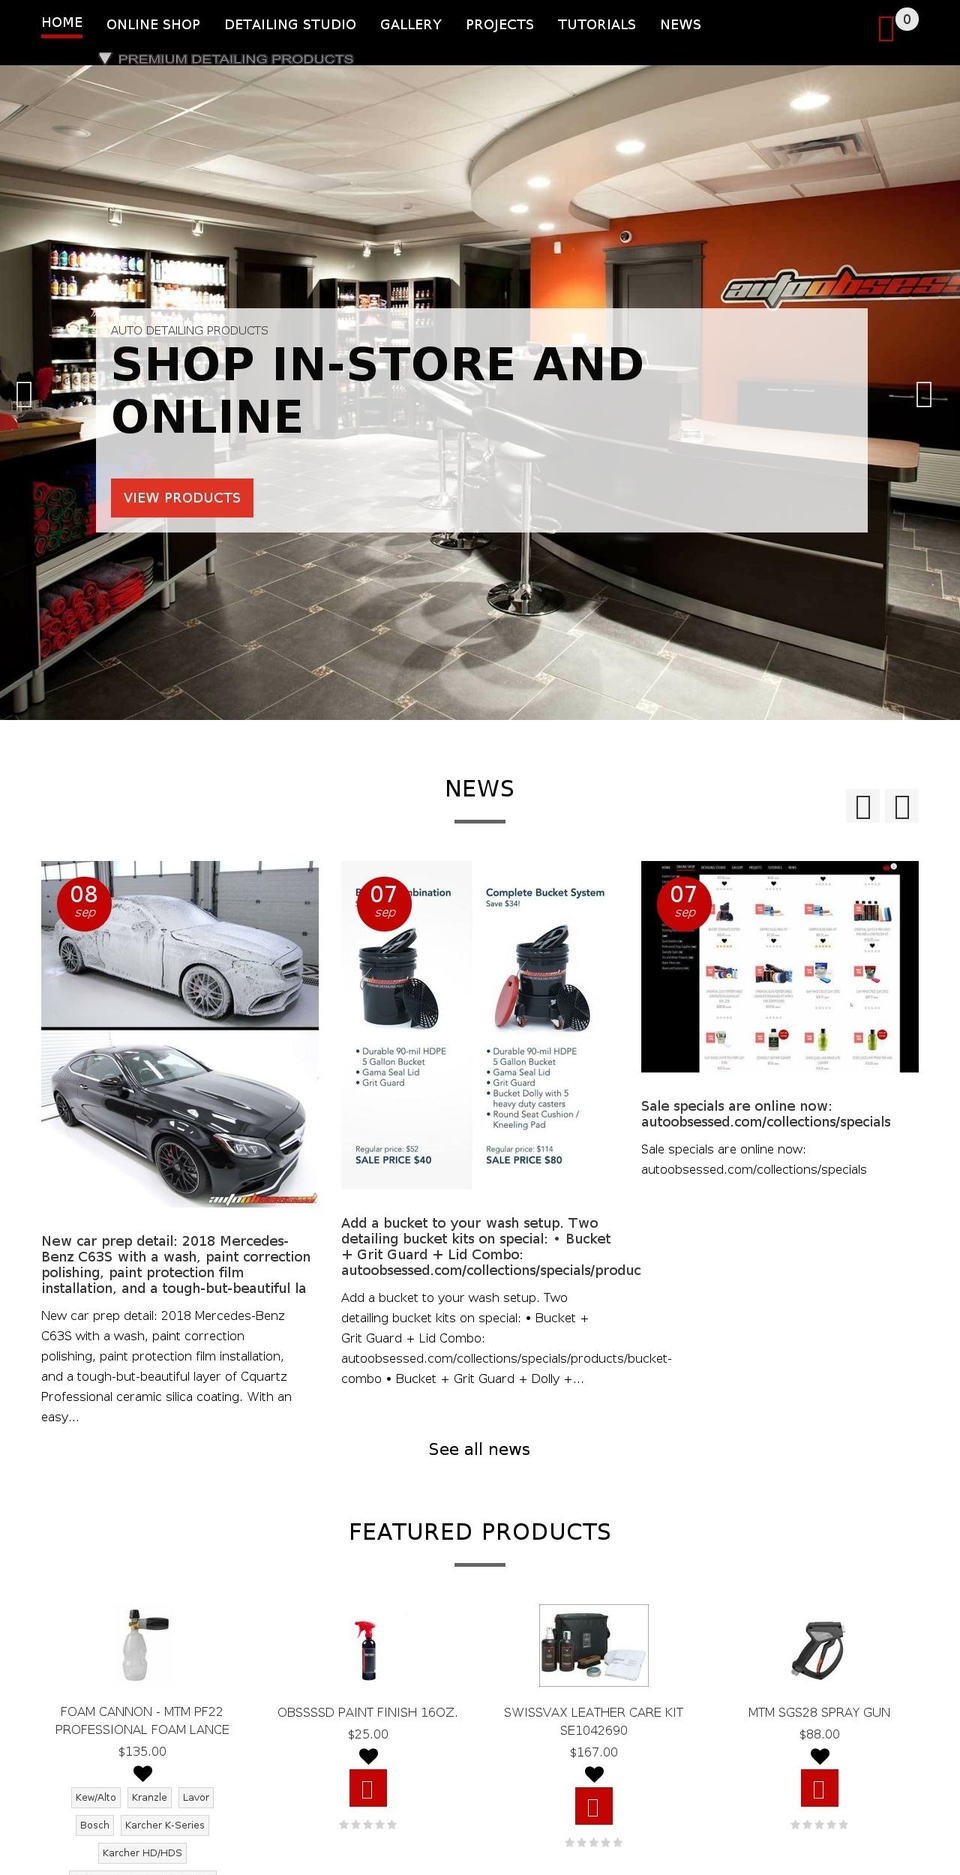 Copy of theme-export-createsimple-inc-myshopify... Shopify theme site example autobsession.org